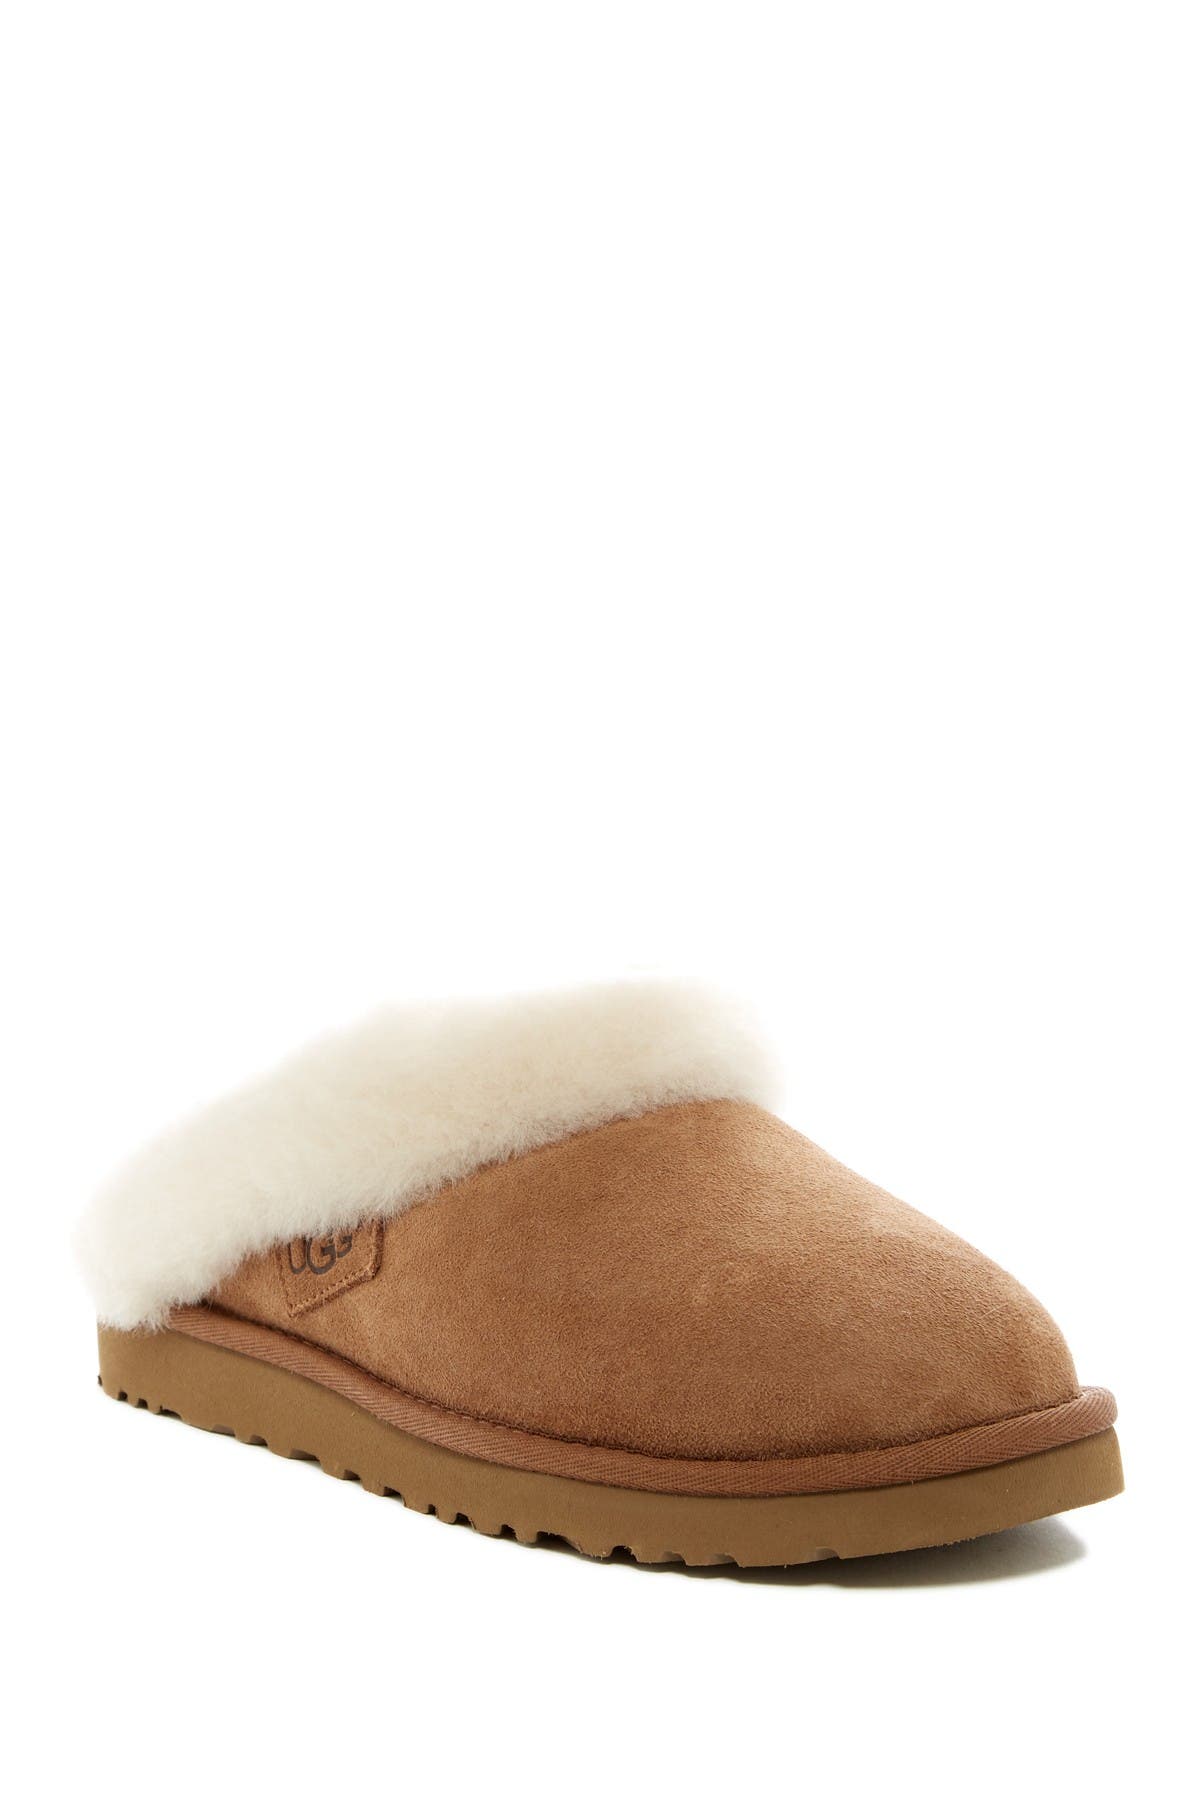 UGG | Cluggette Genuine Shearling Lined 